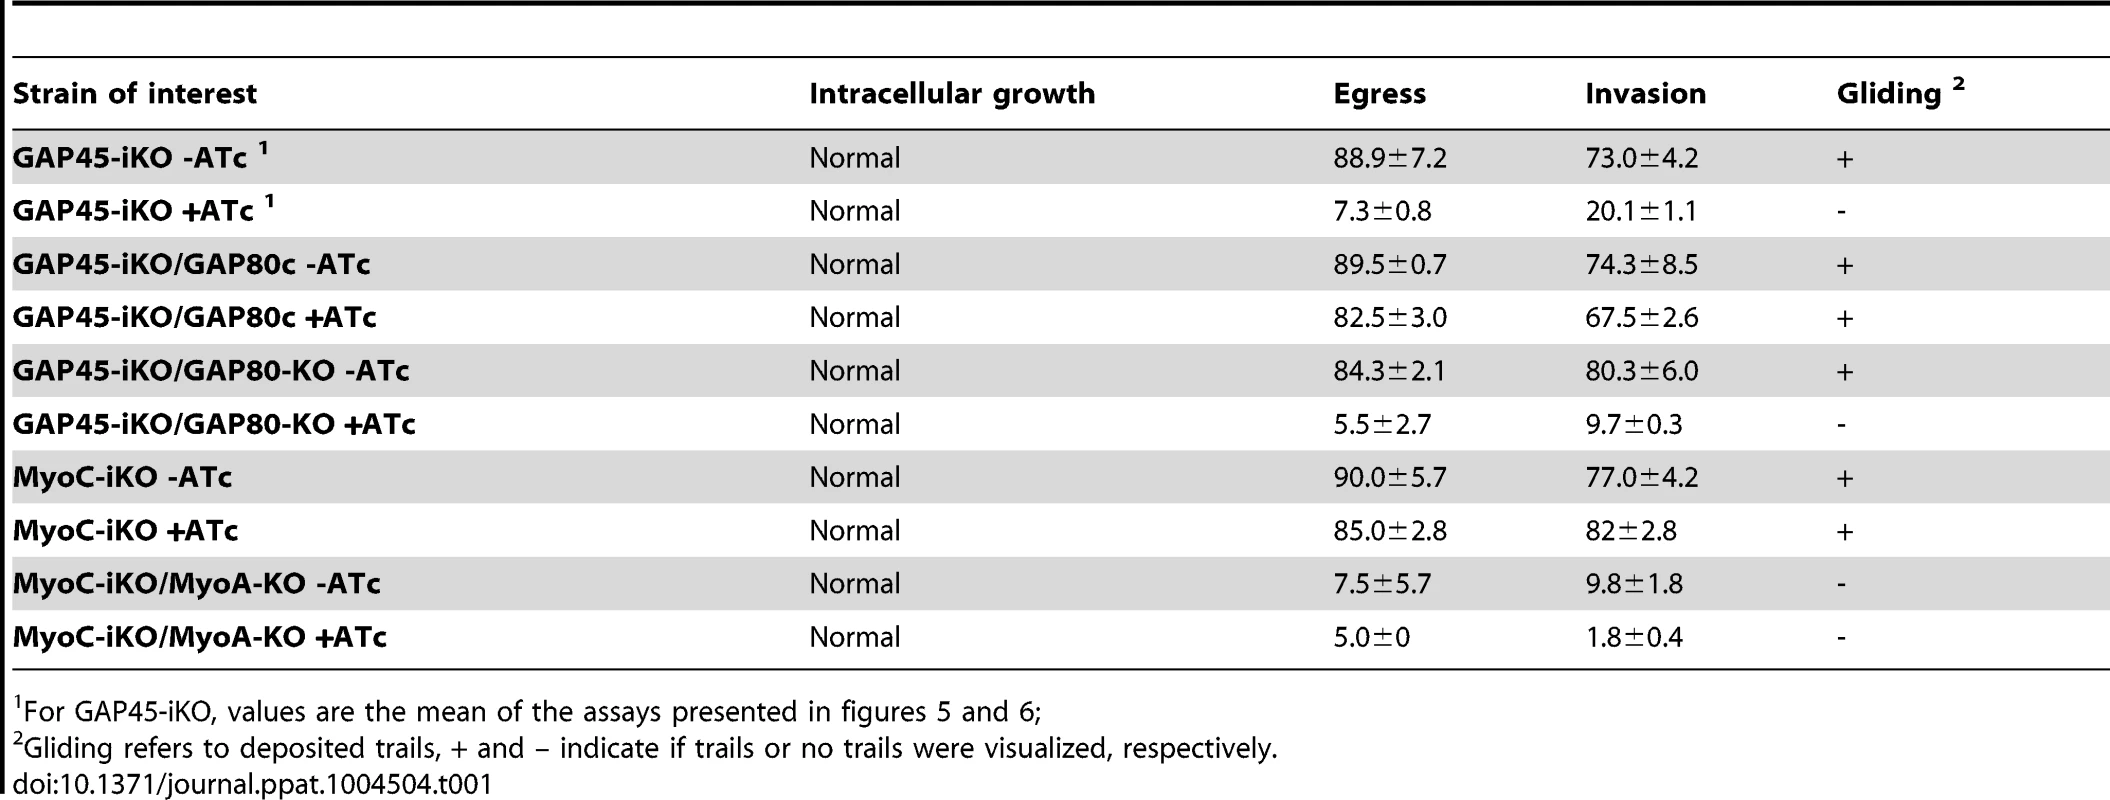 Summary of the phenotypes observed in this study.